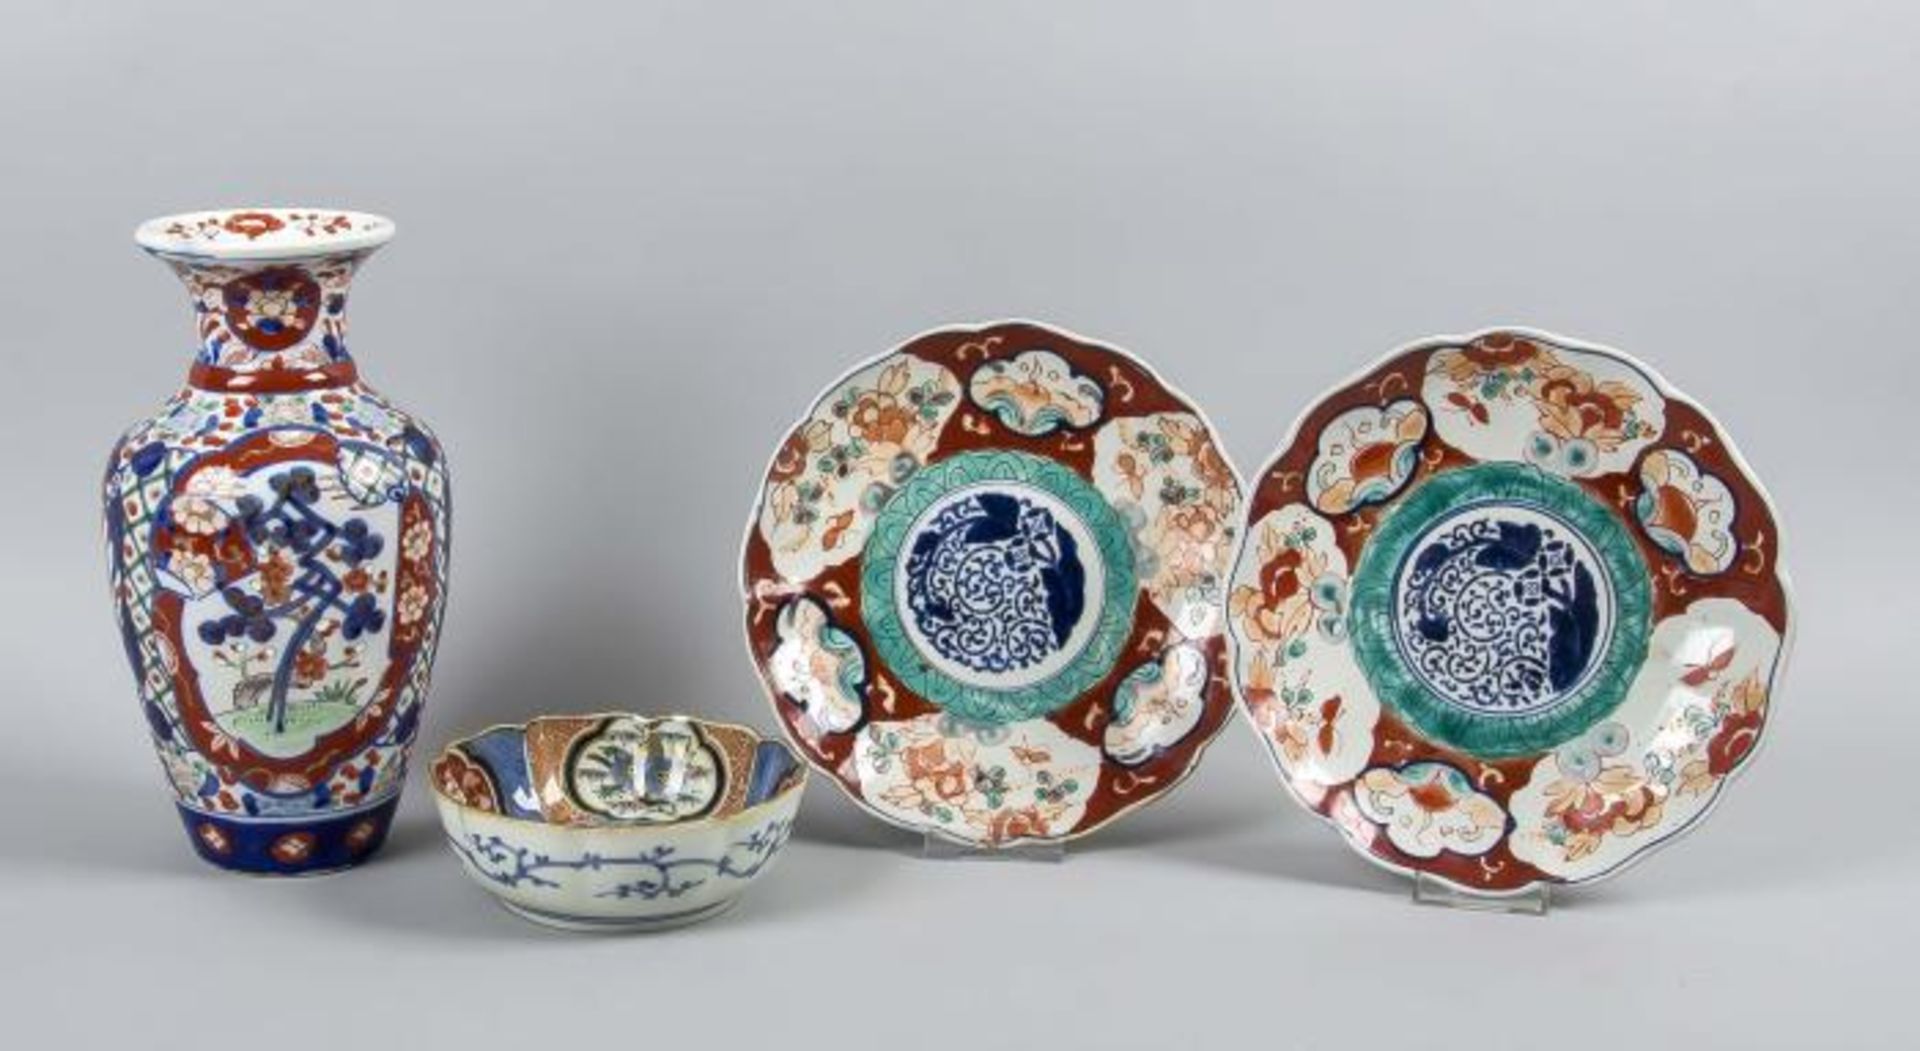 Four parts 19th century Imari porcelain: 1x beautiful vase with floraal- and gold decor (good), 1x